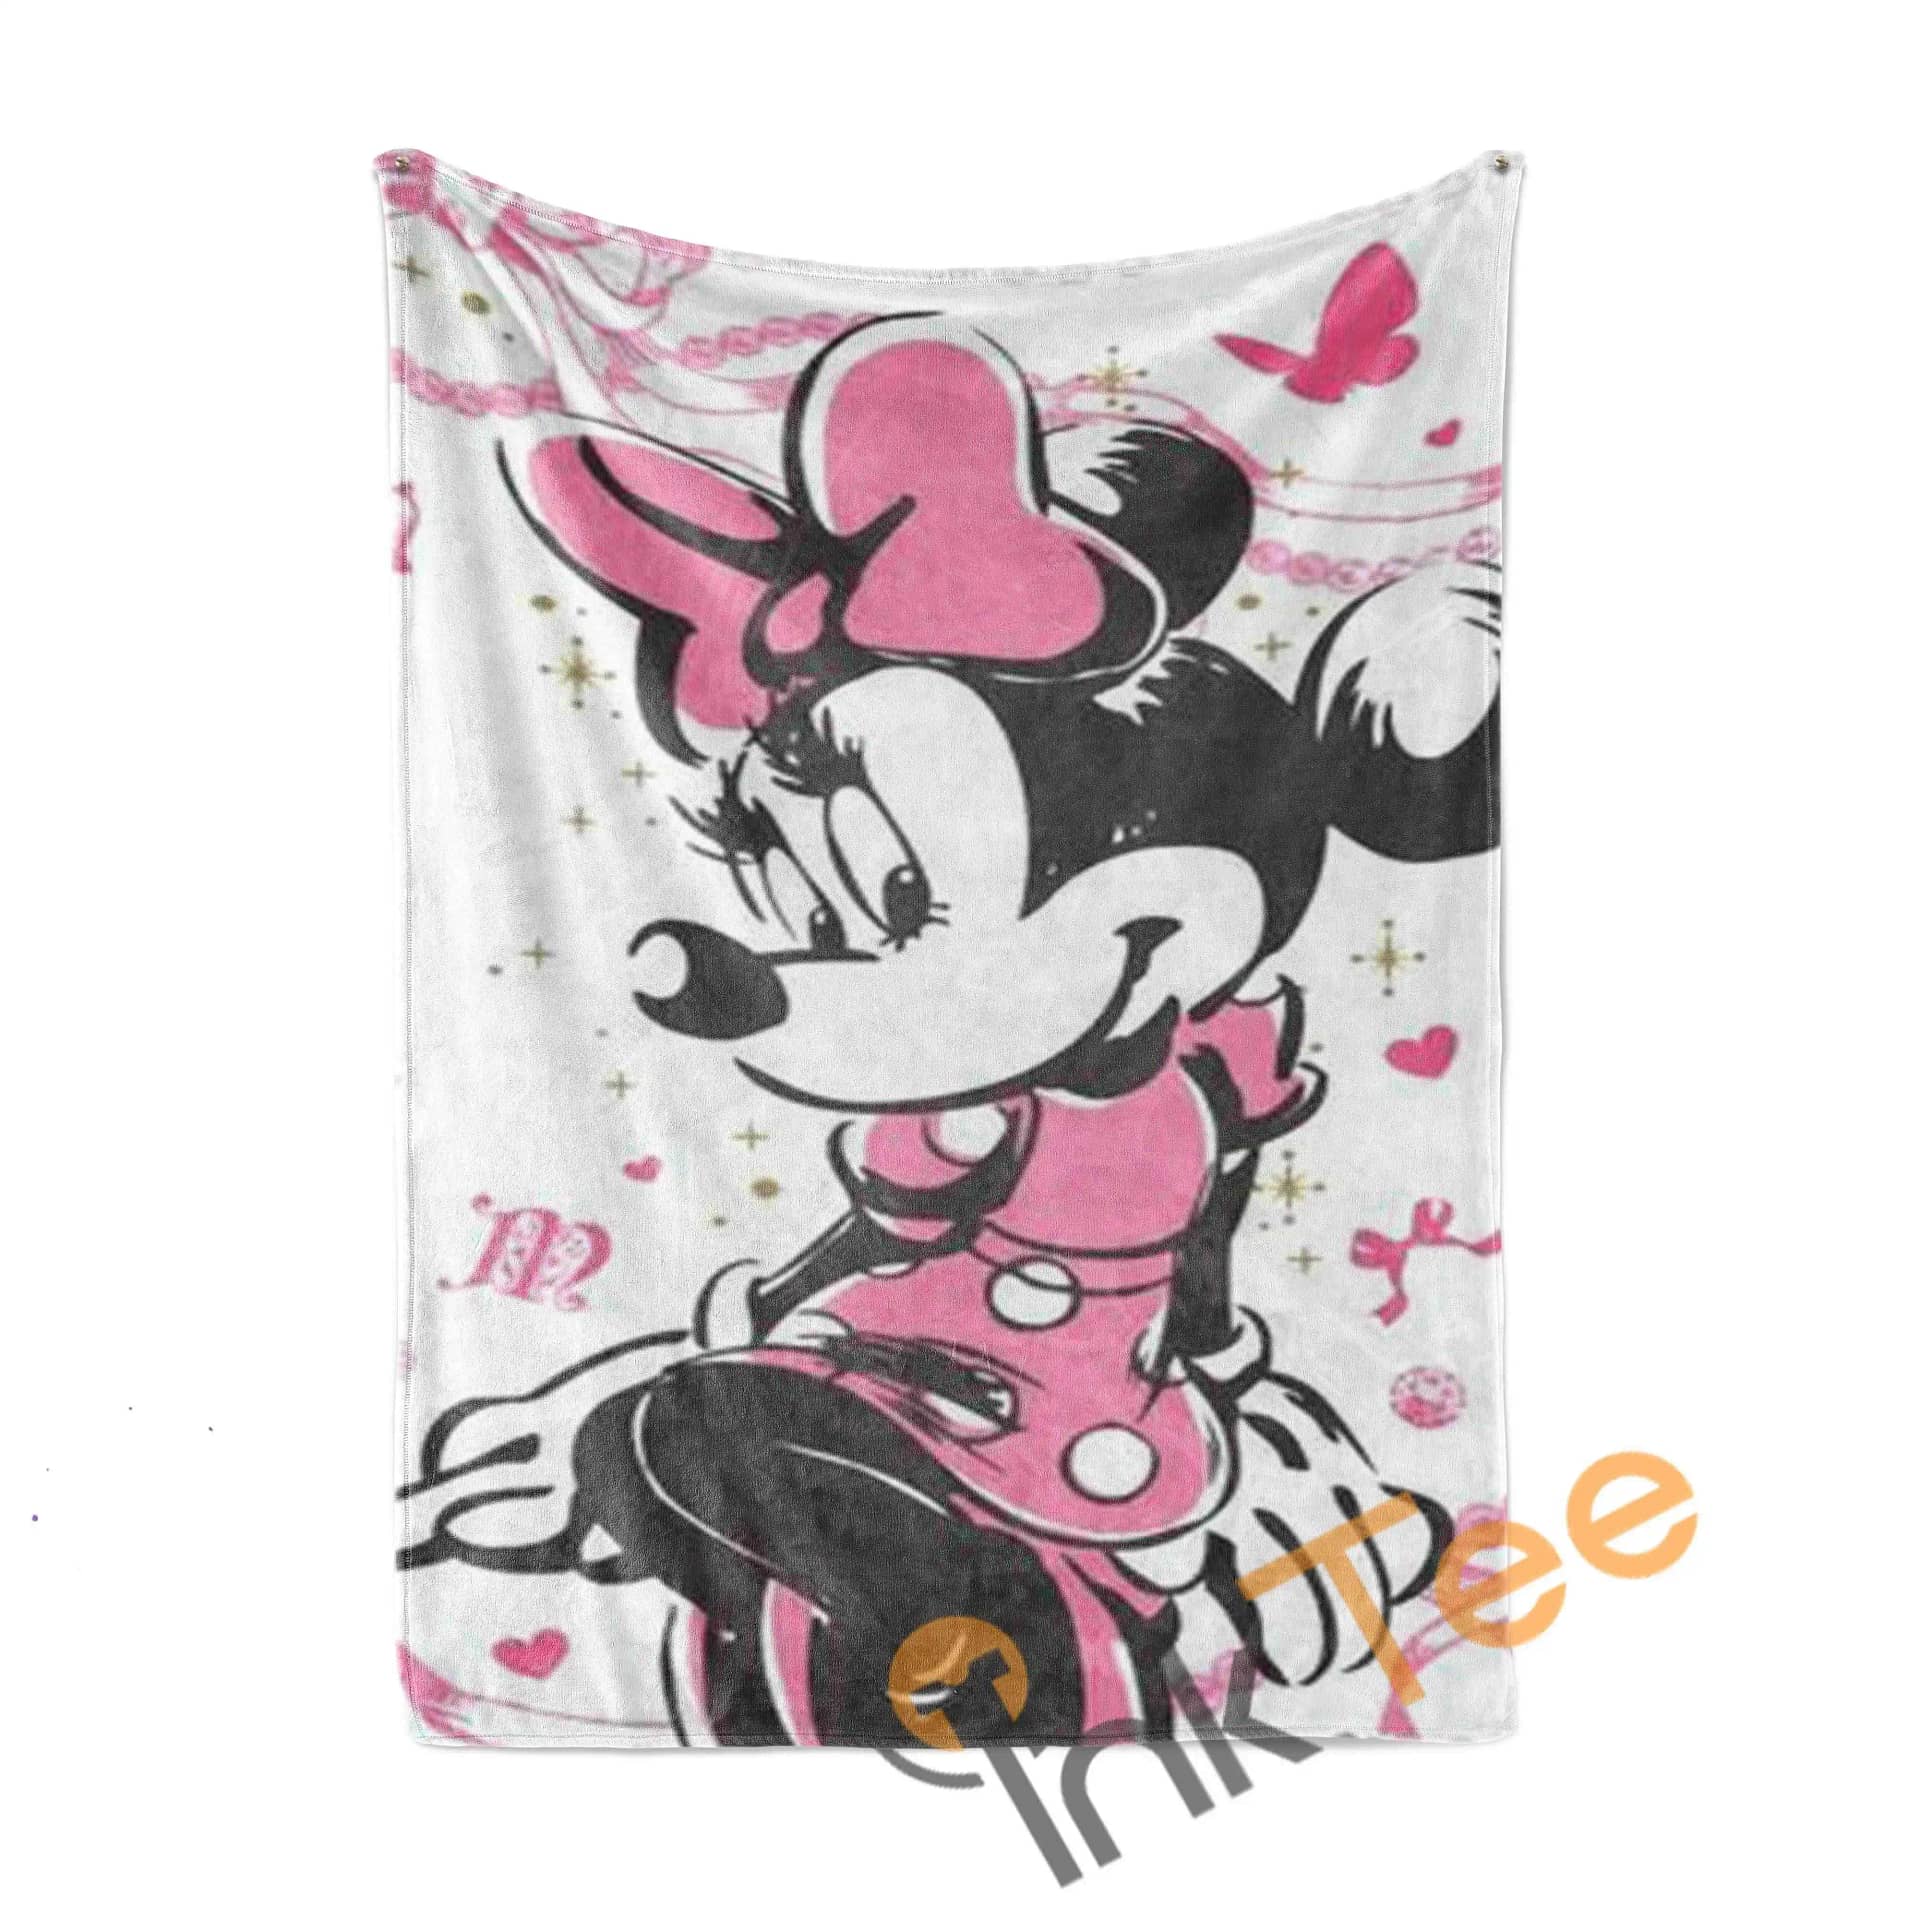 Cute Minnie Mouse Limited Edition Area Amazon Best Seller 4105 Fleece Blanket